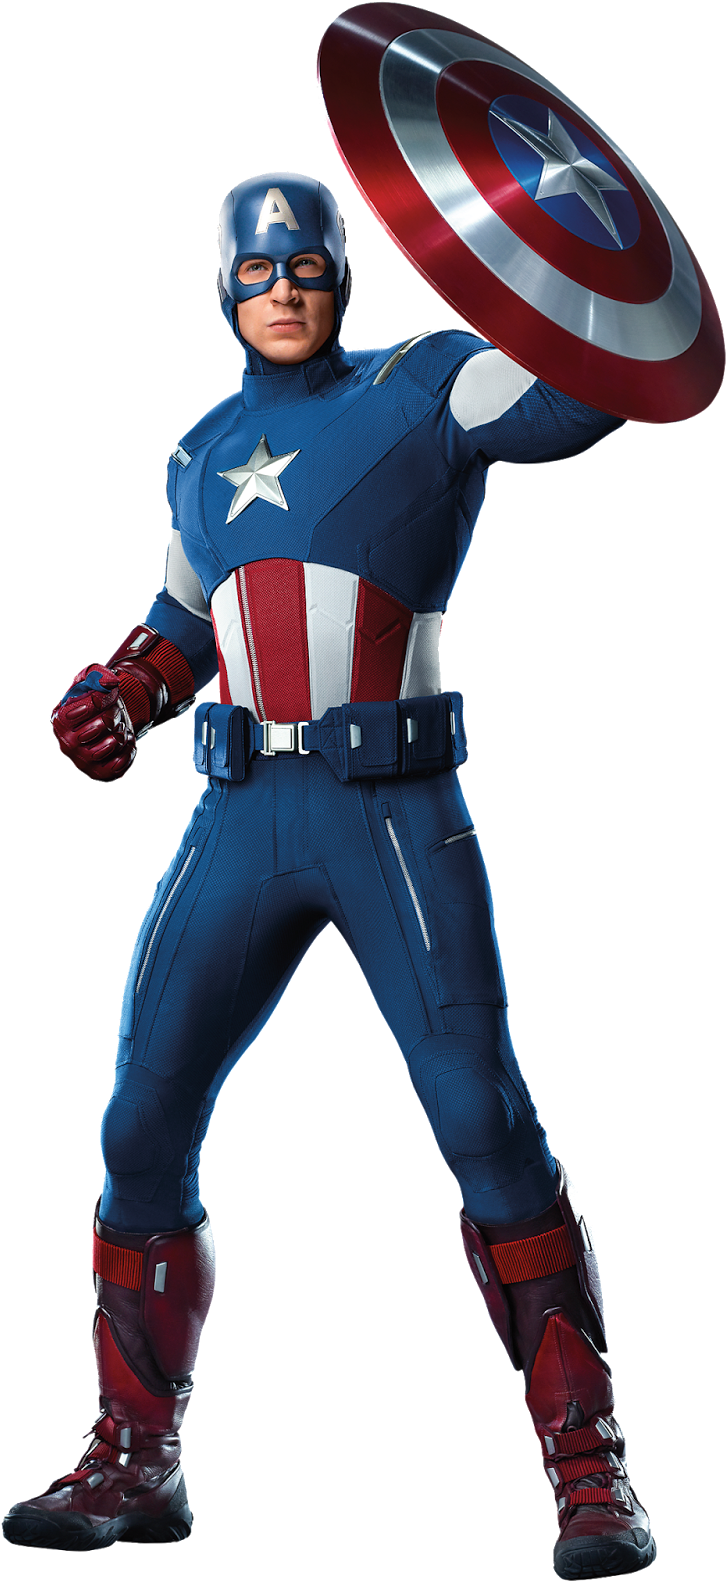 Download Captainamerica Avengers Captain America Avengers Png Png Image With No Background Pngkey Com